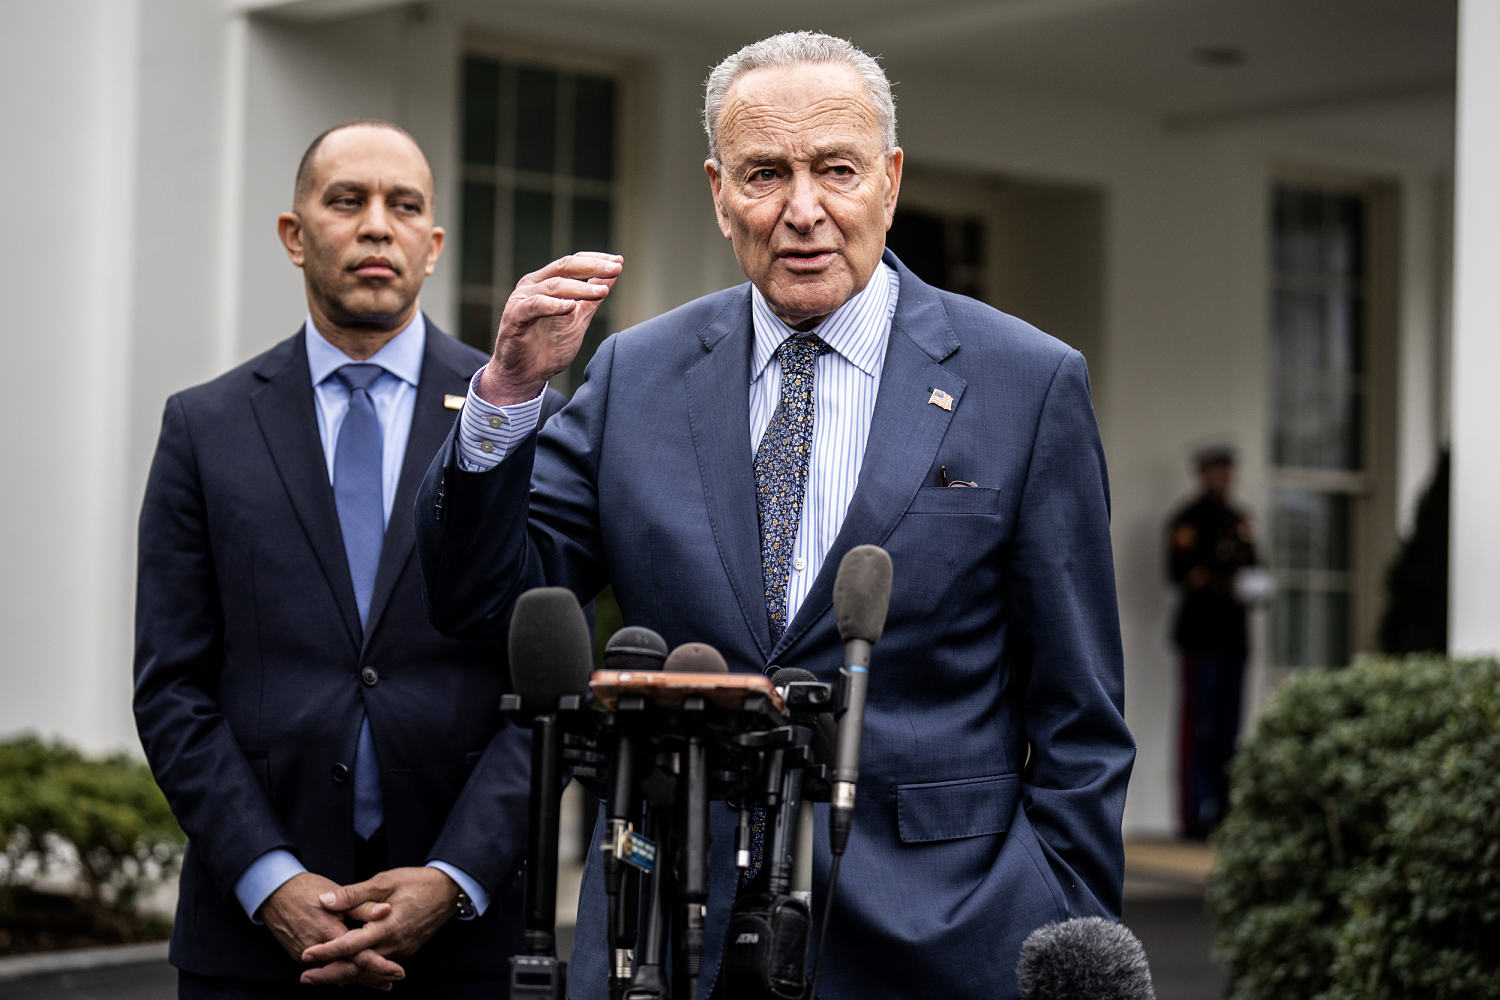 Democratic leaders Chuck Schumer and Hakeem Jeffries to endorse Harris for president